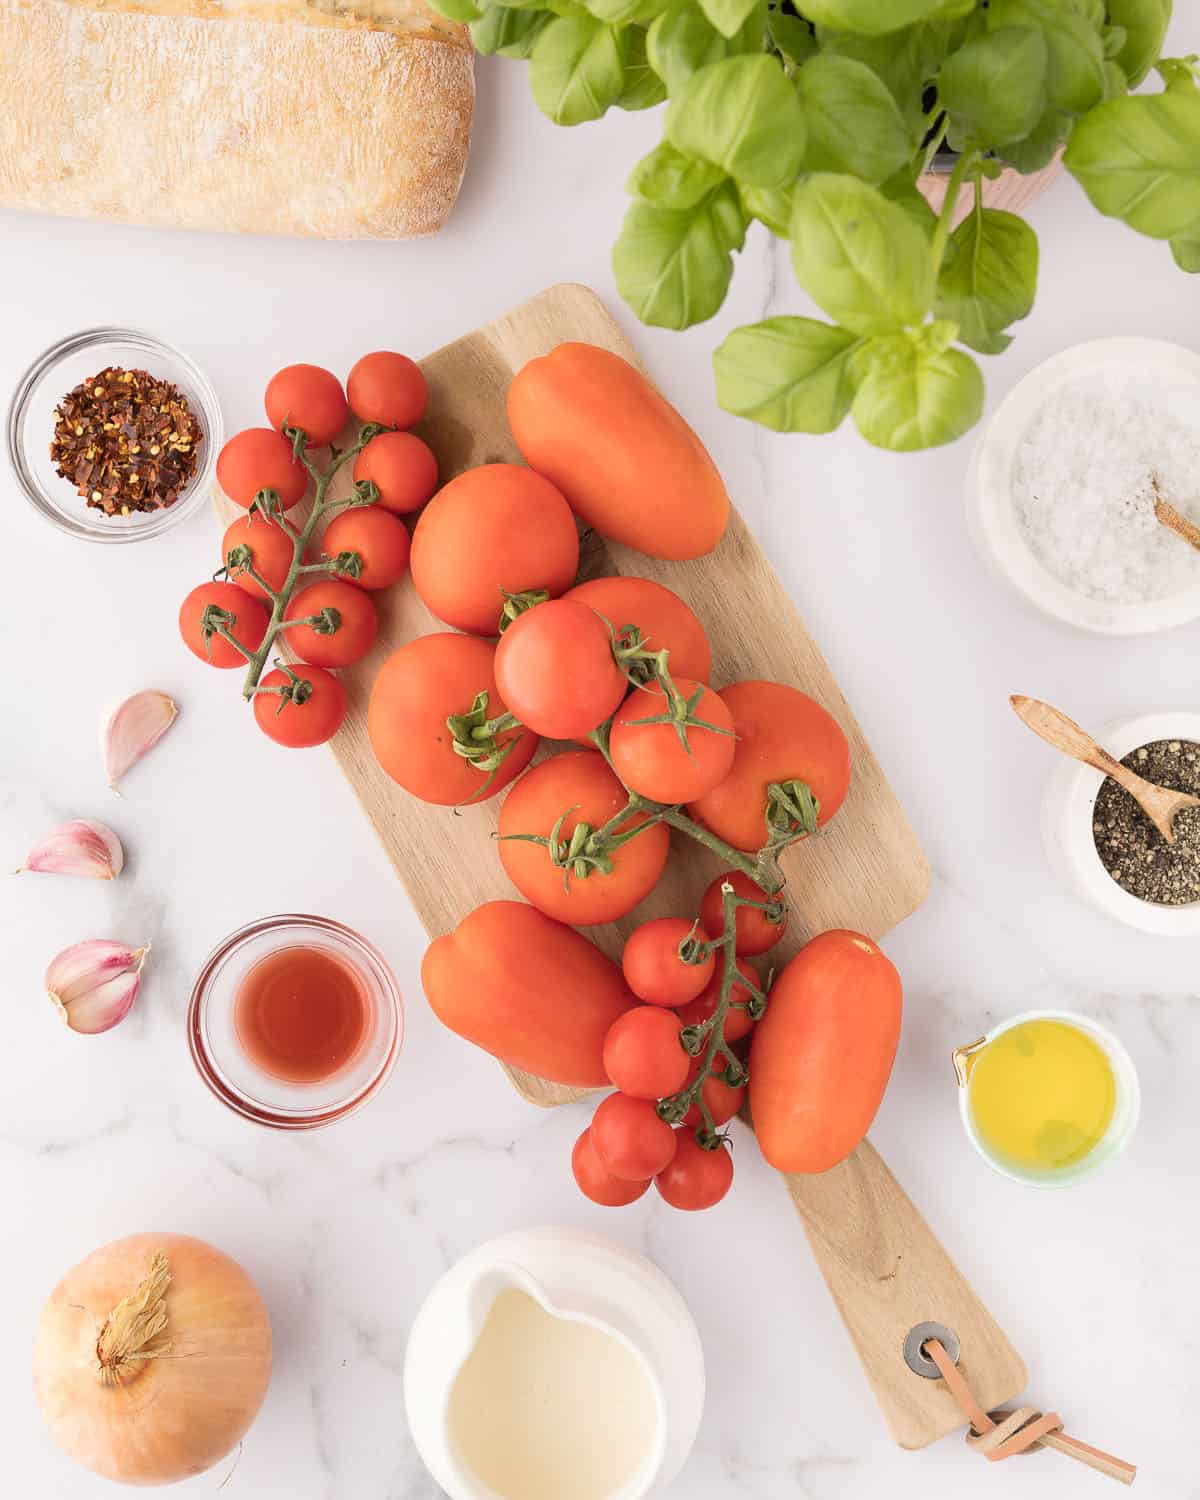 Fresh tomatoes of different sizes on a wood cutting board set on a white countertop, with other ingredients surrounding in small bowls, along with garlic cloves and fresh basil.